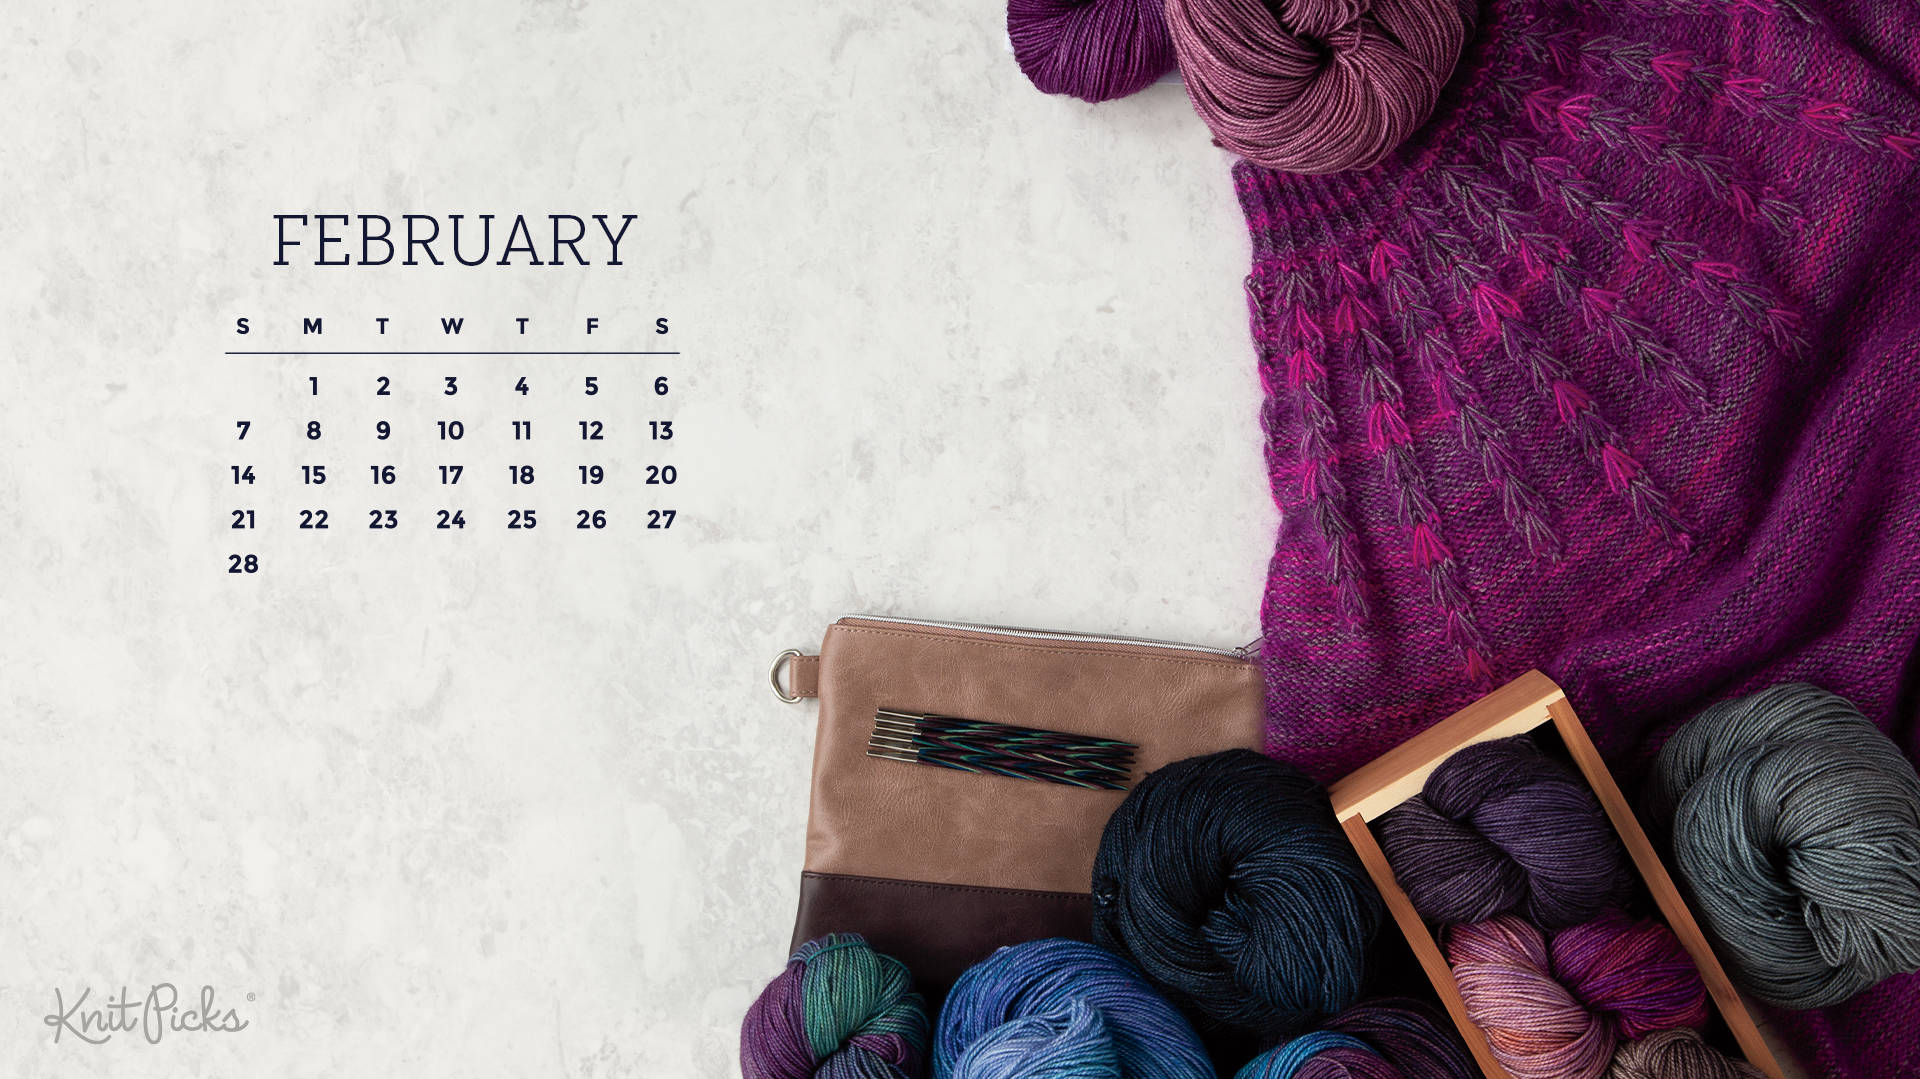 February 2019 Calendar With Yarn And Knitting Needles Wallpaper